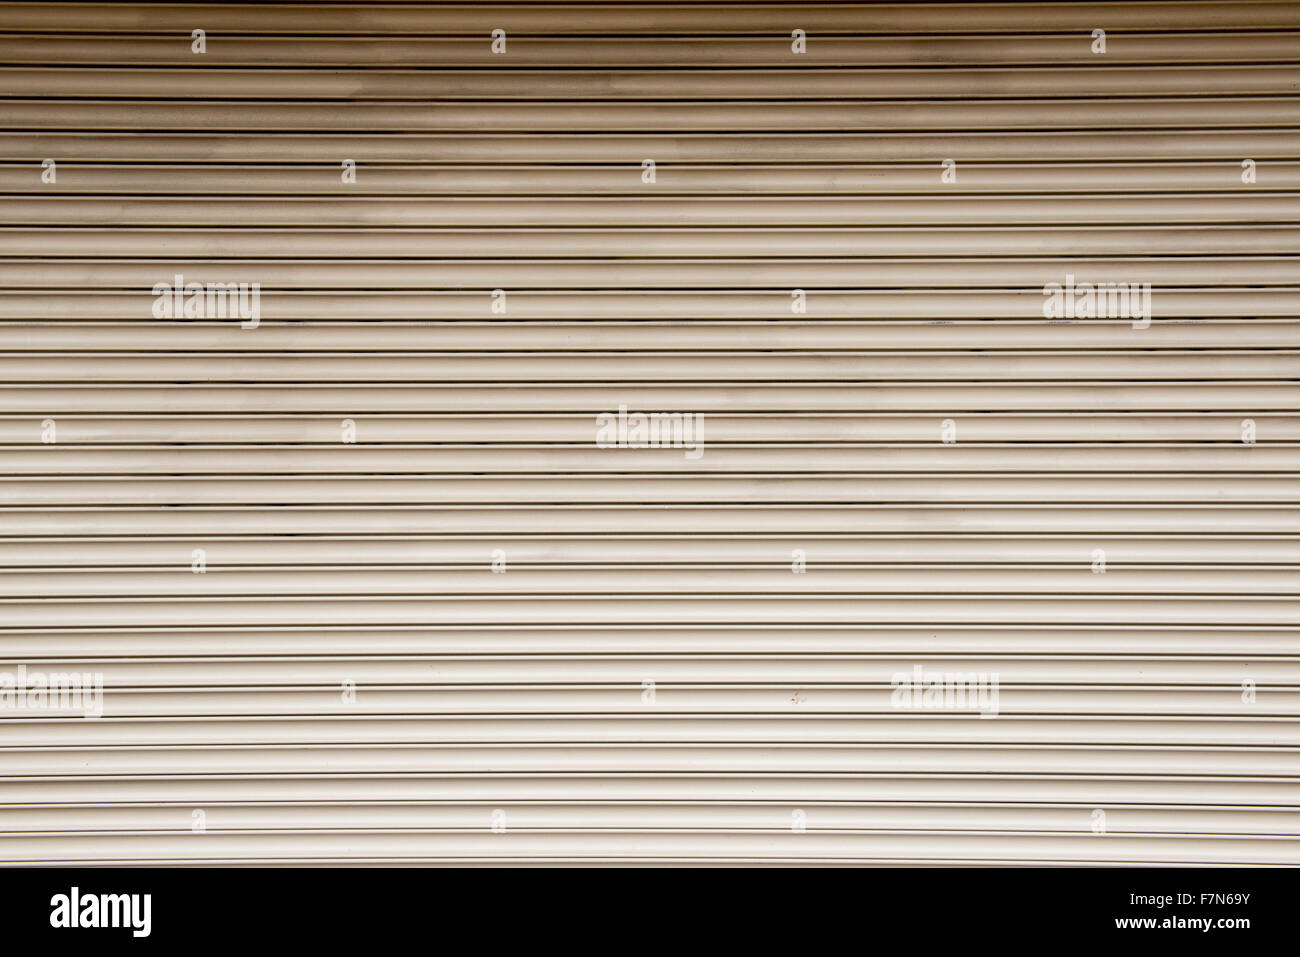 Straight lines on a shop front shutter Stock Photo